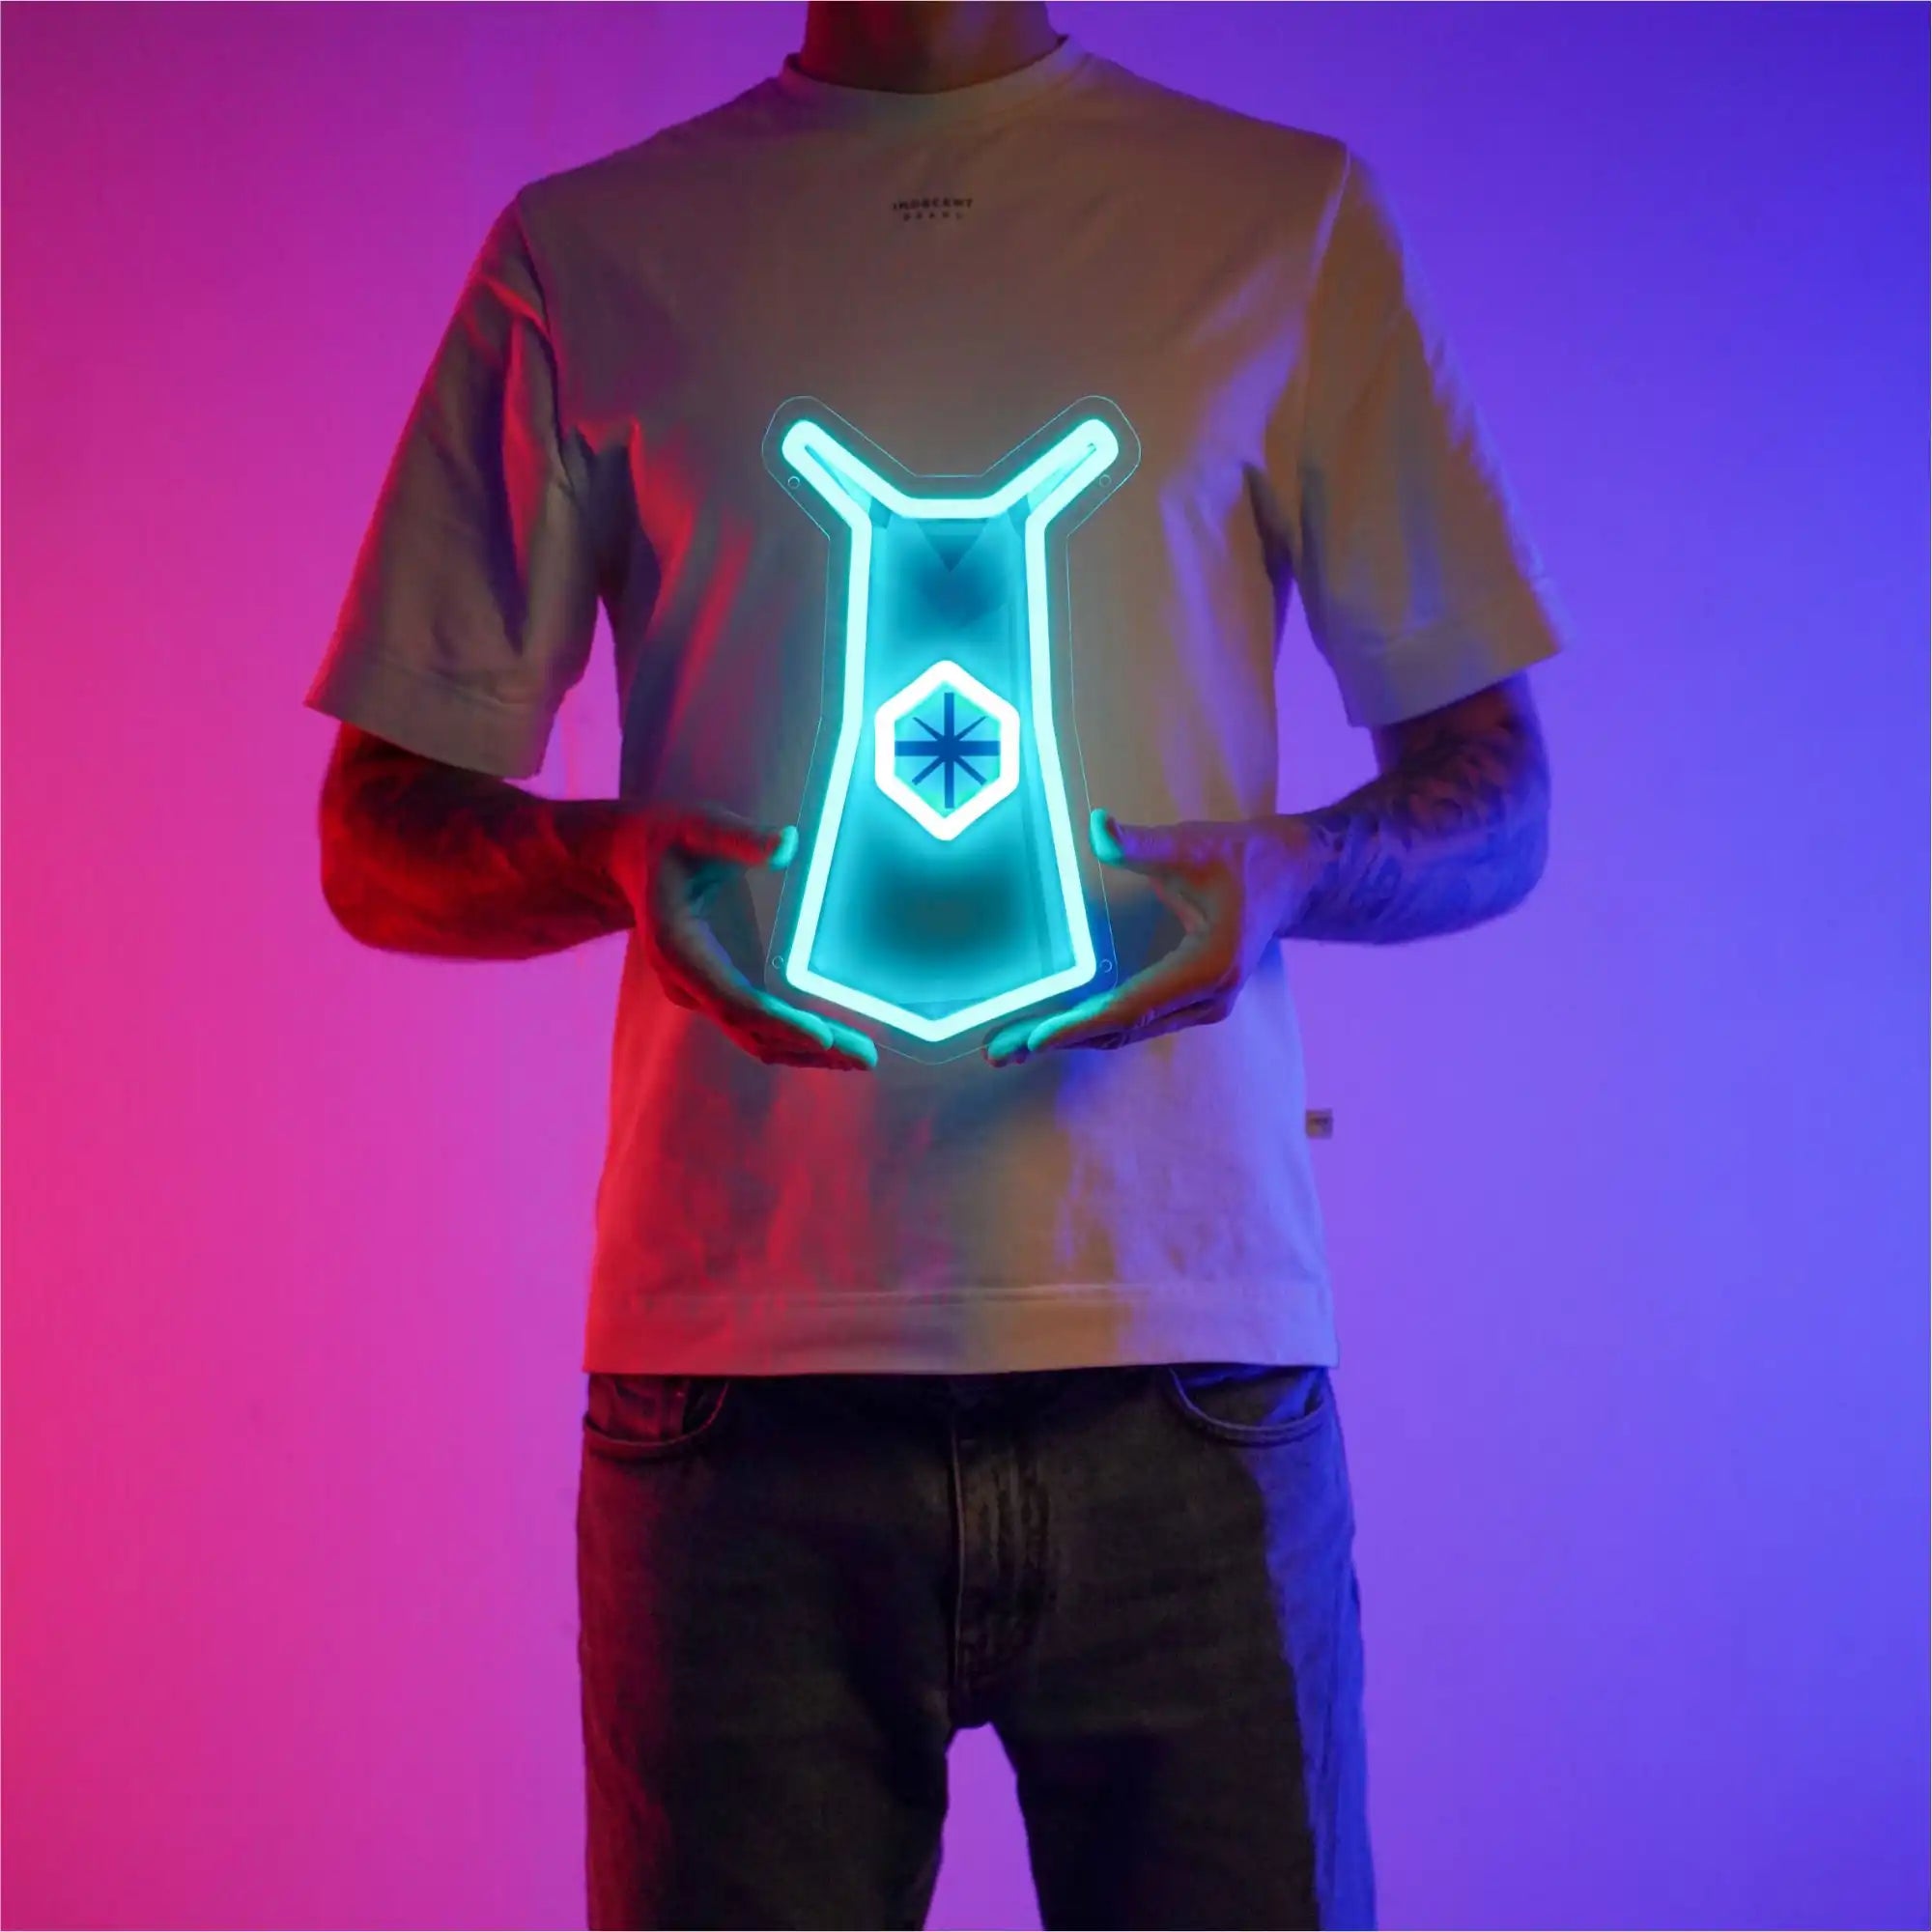 A person proudly displays the Runescape Quest Skillcape LED neon sign, featuring the iconic Quest Skillcape from the game. This LED neon sign represents achievement and completion in Old School RuneScape. A symbol of perseverance and accomplishment, it adds a touch of triumph to any gaming space.